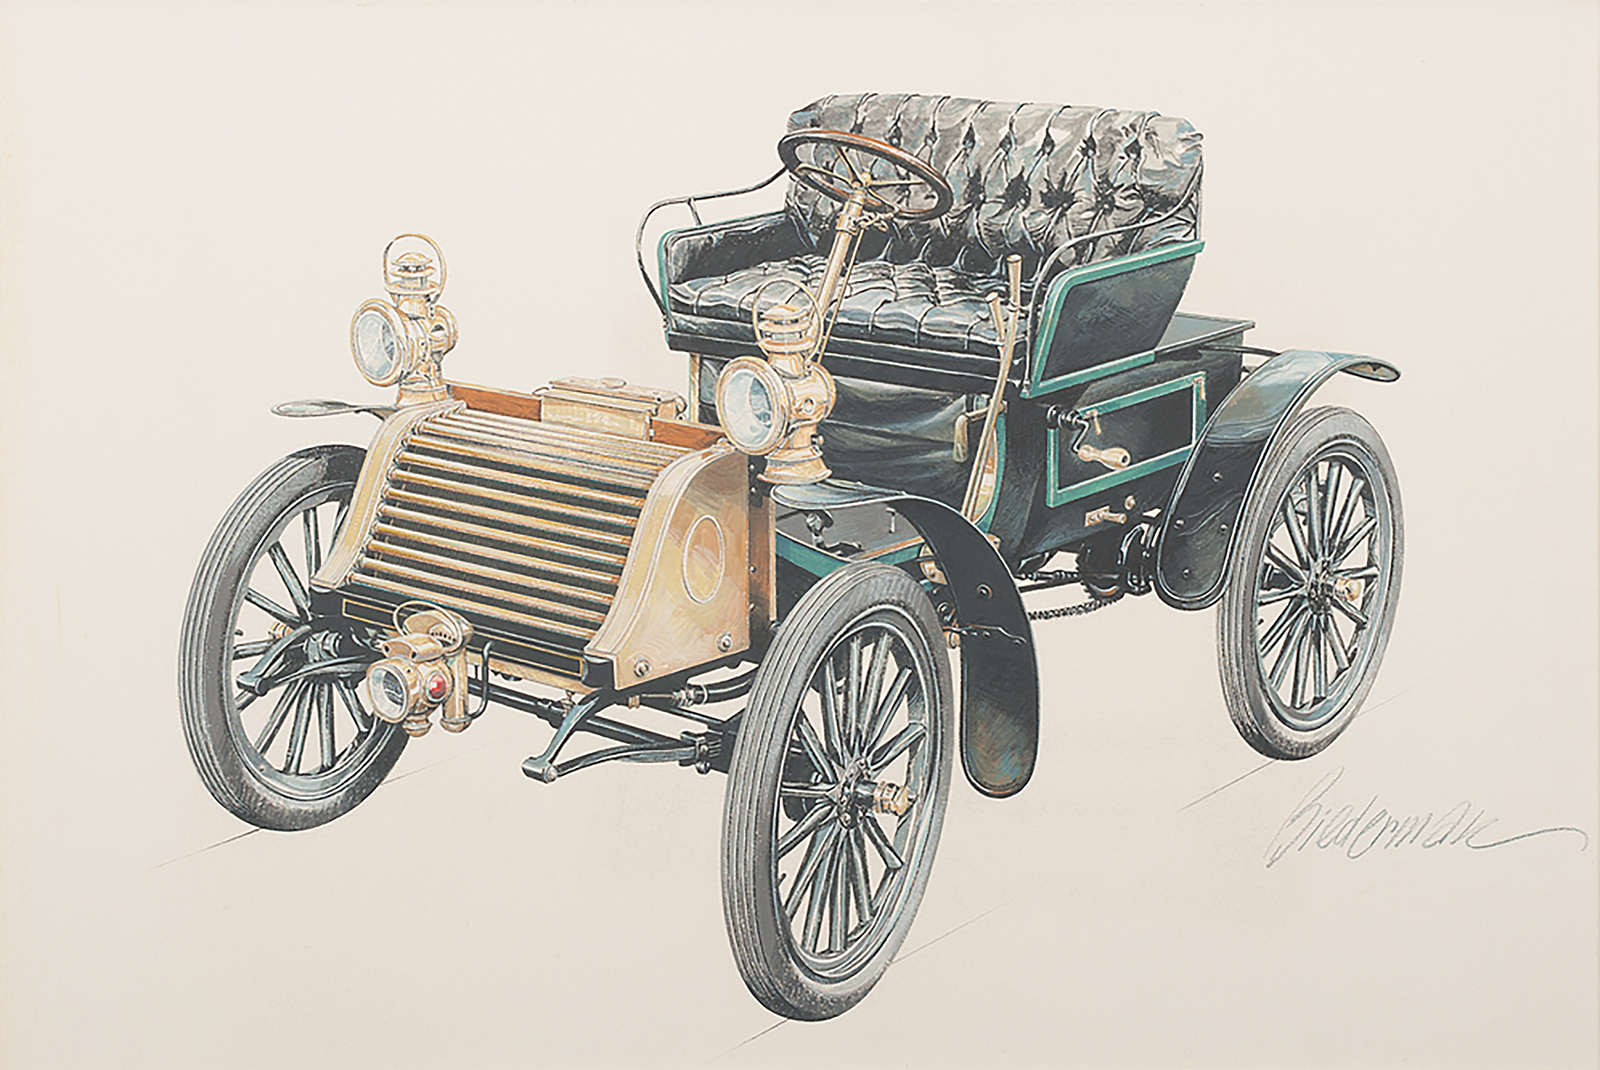 1904 Eldredge Runabout: Illustrated by Jerome D. Biederman